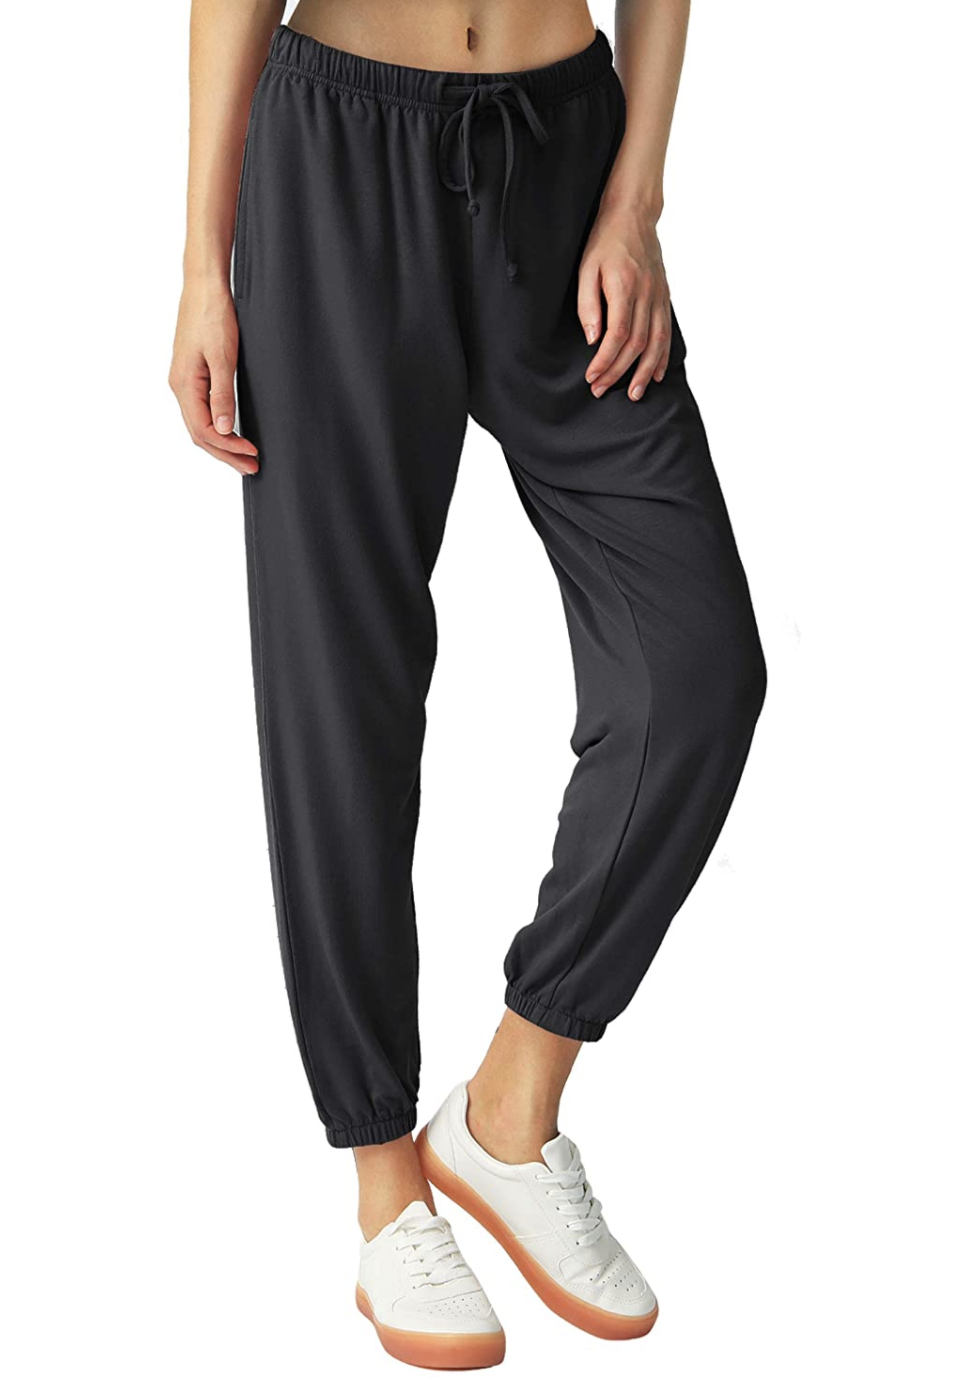 Specialmagic Comfortable Joggers Are Soft Enough to Live in 24/7 | Us ...